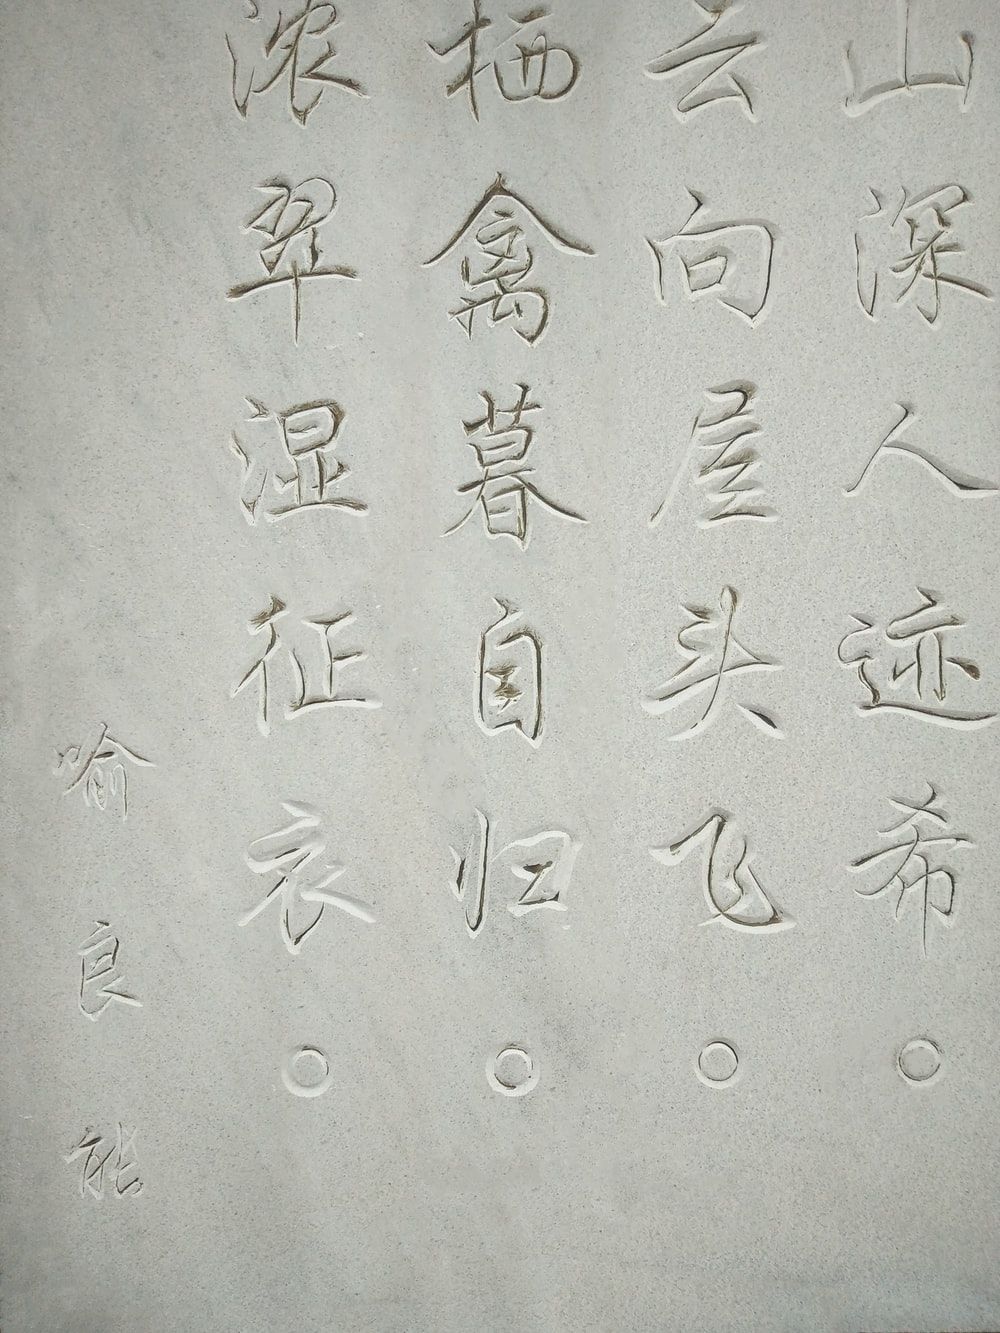 Chinese Letters Picture. Download Free Image